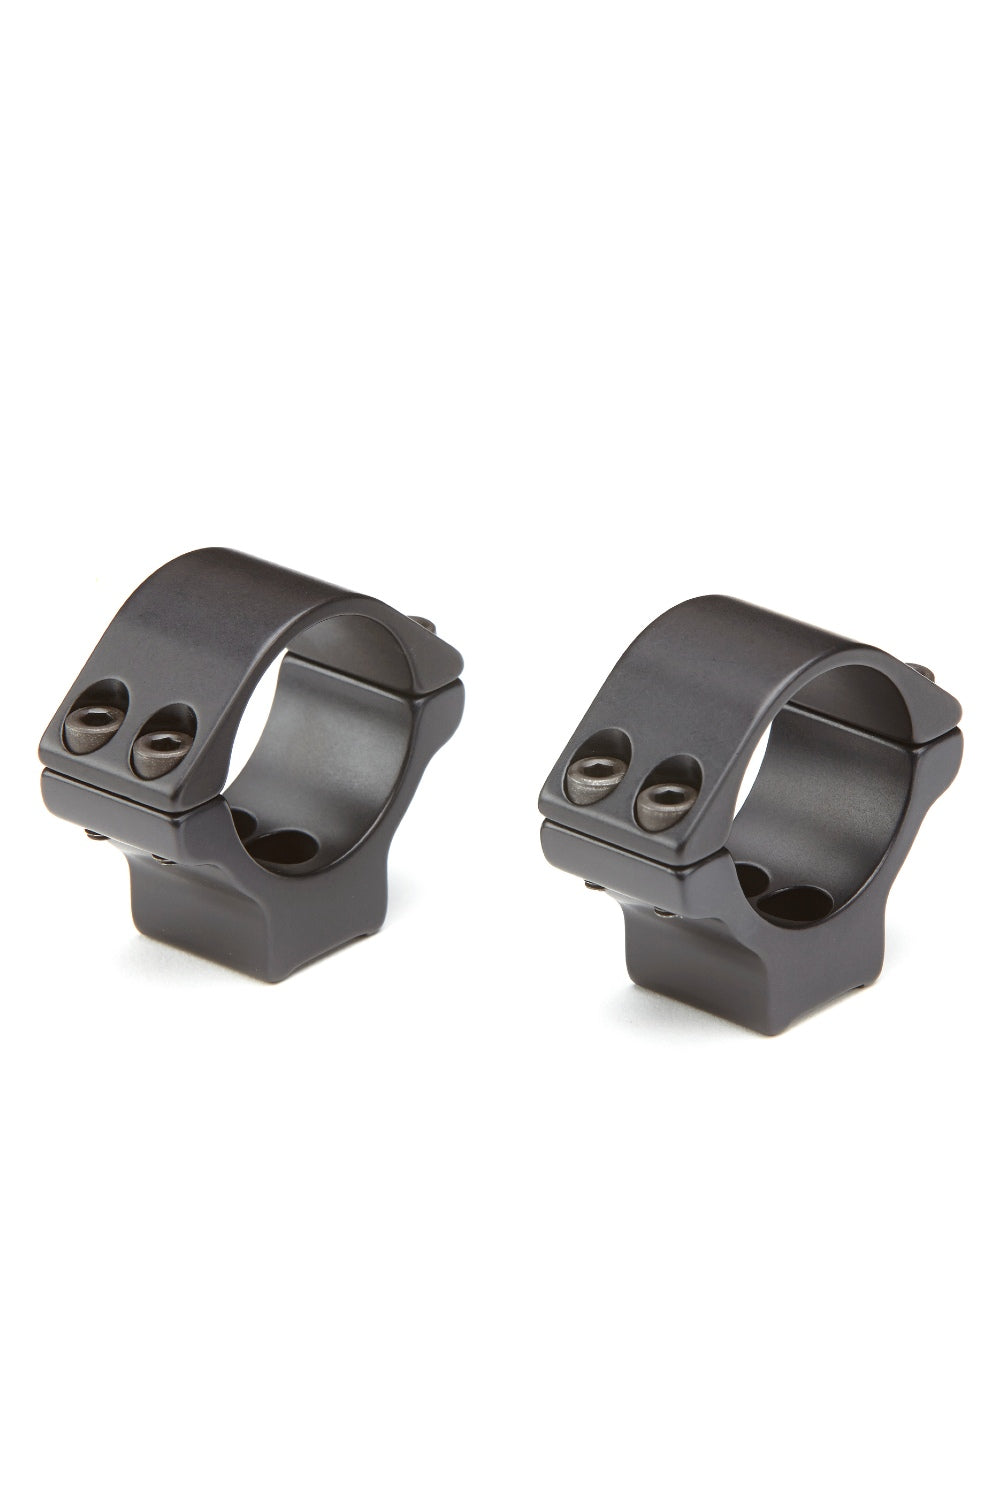 Bisley Two Piece Mounts for 30mm Tube for Theoben Rapid 7